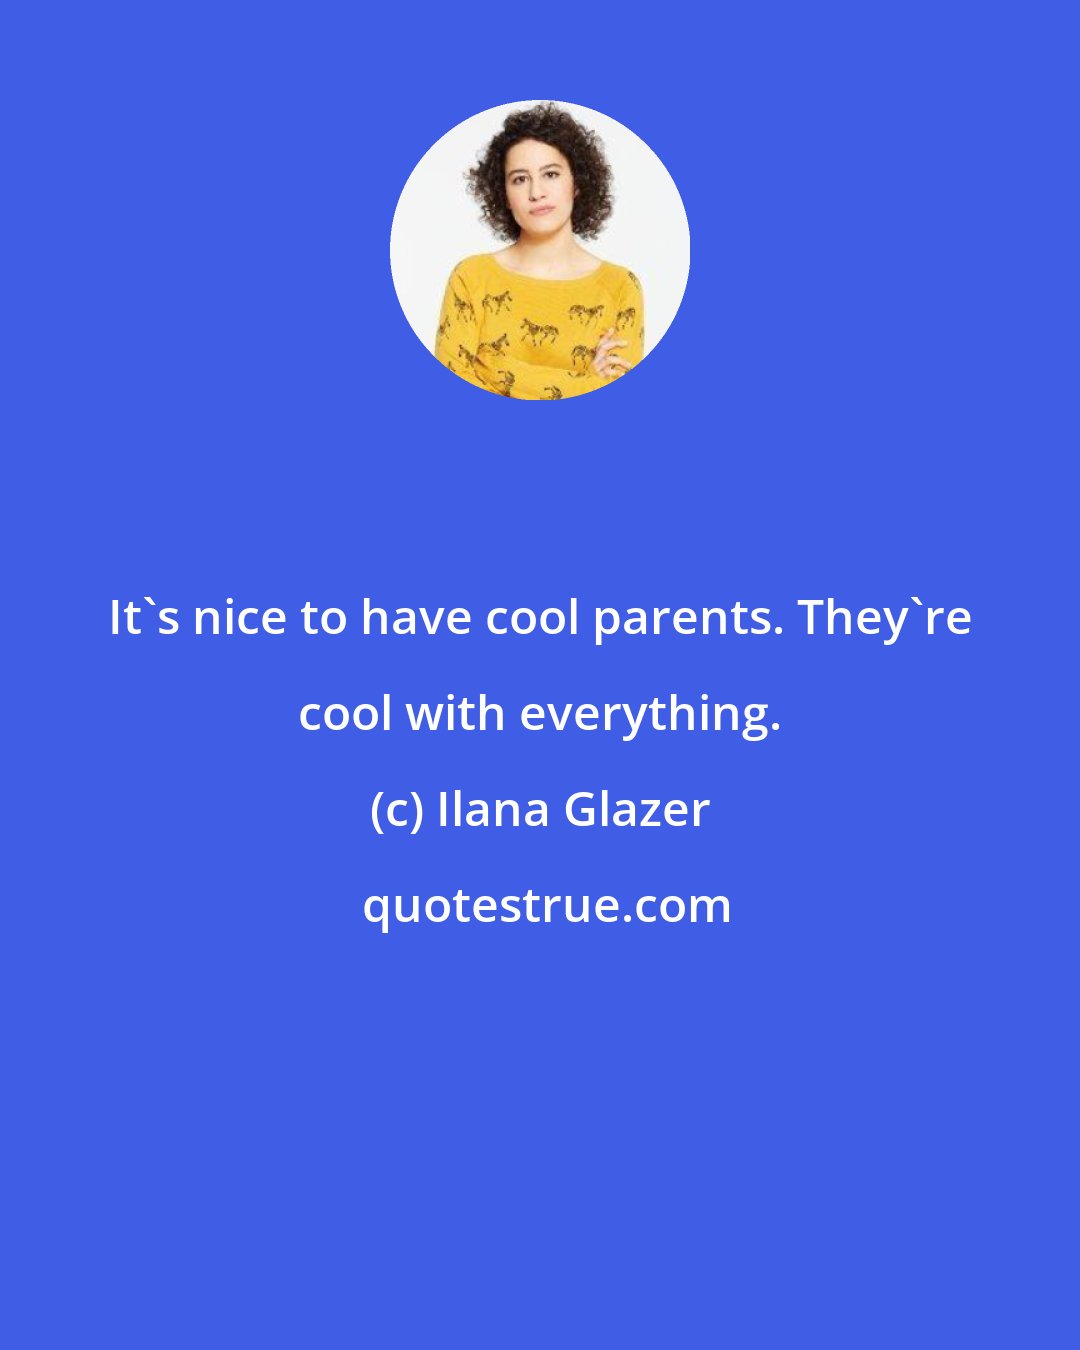 Ilana Glazer: It's nice to have cool parents. They're cool with everything.